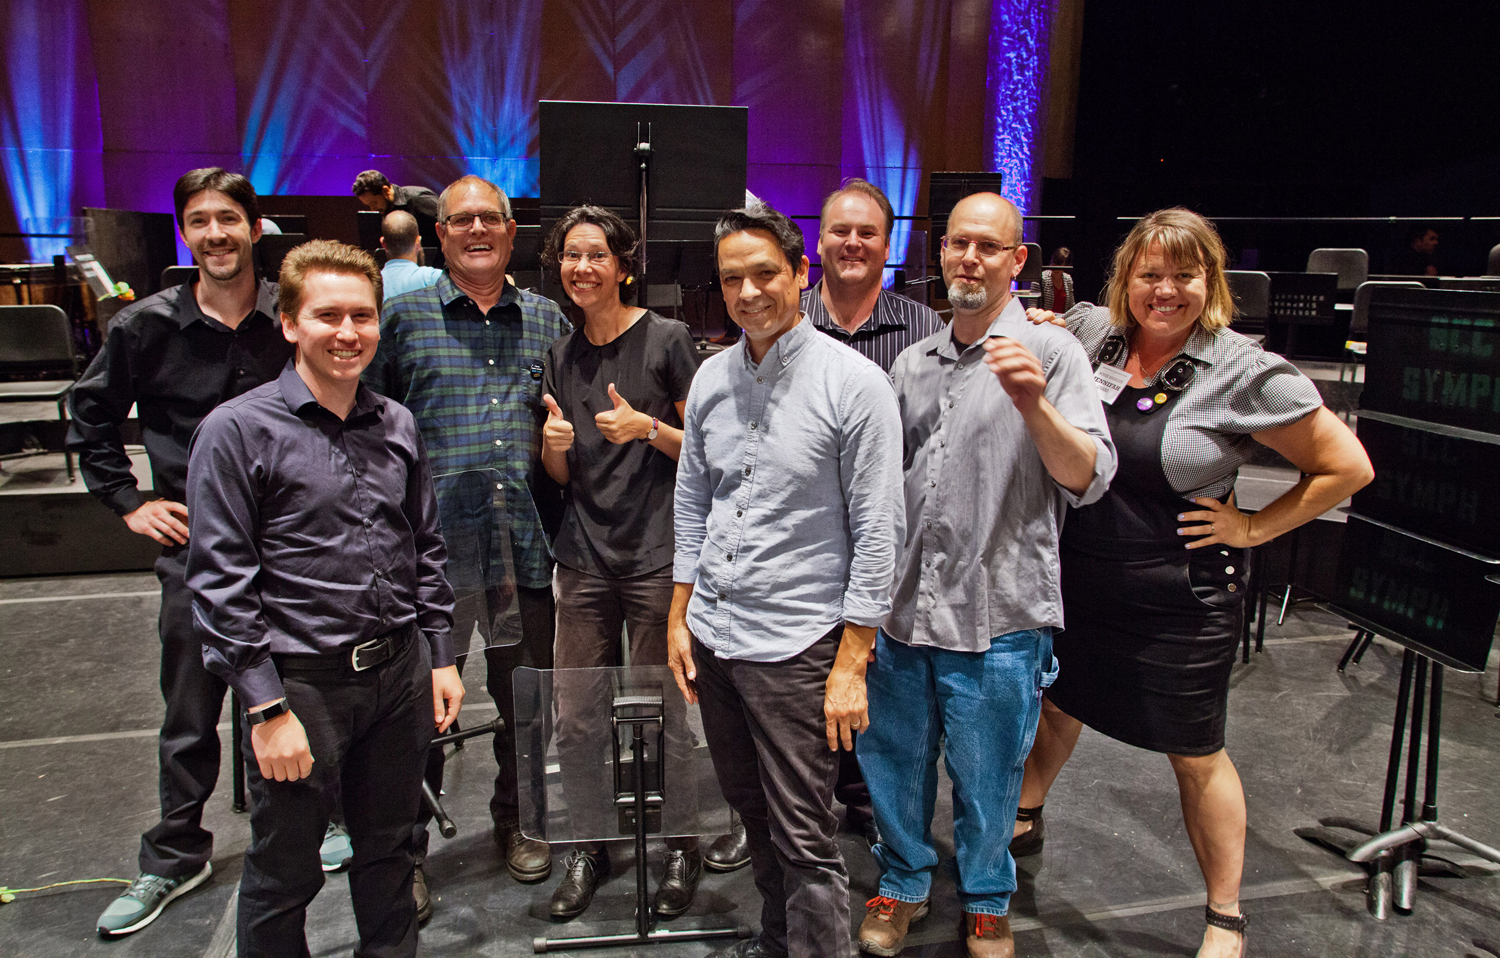 The faces behind the scenes – the Cabrillo Festival production team! (not pictured: Kelly Ott)